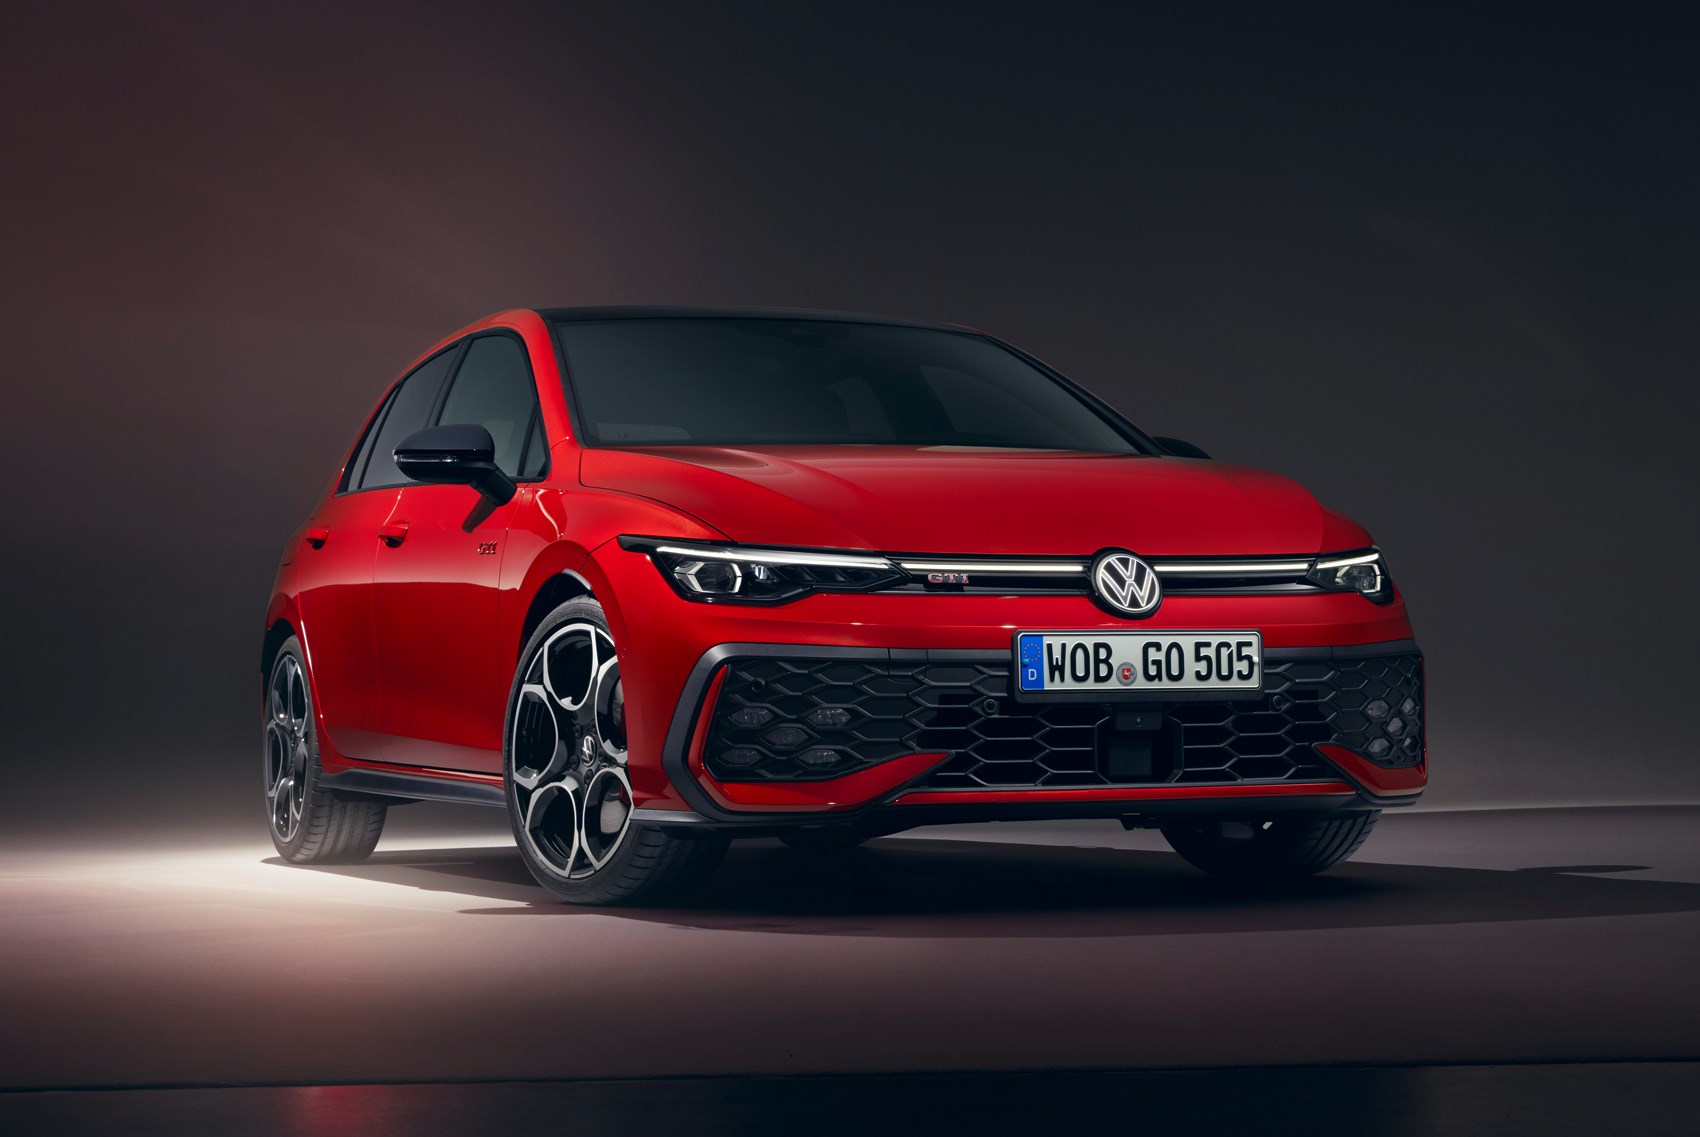 Facelifted VW Golf 8.5 promises to be less annoying this time